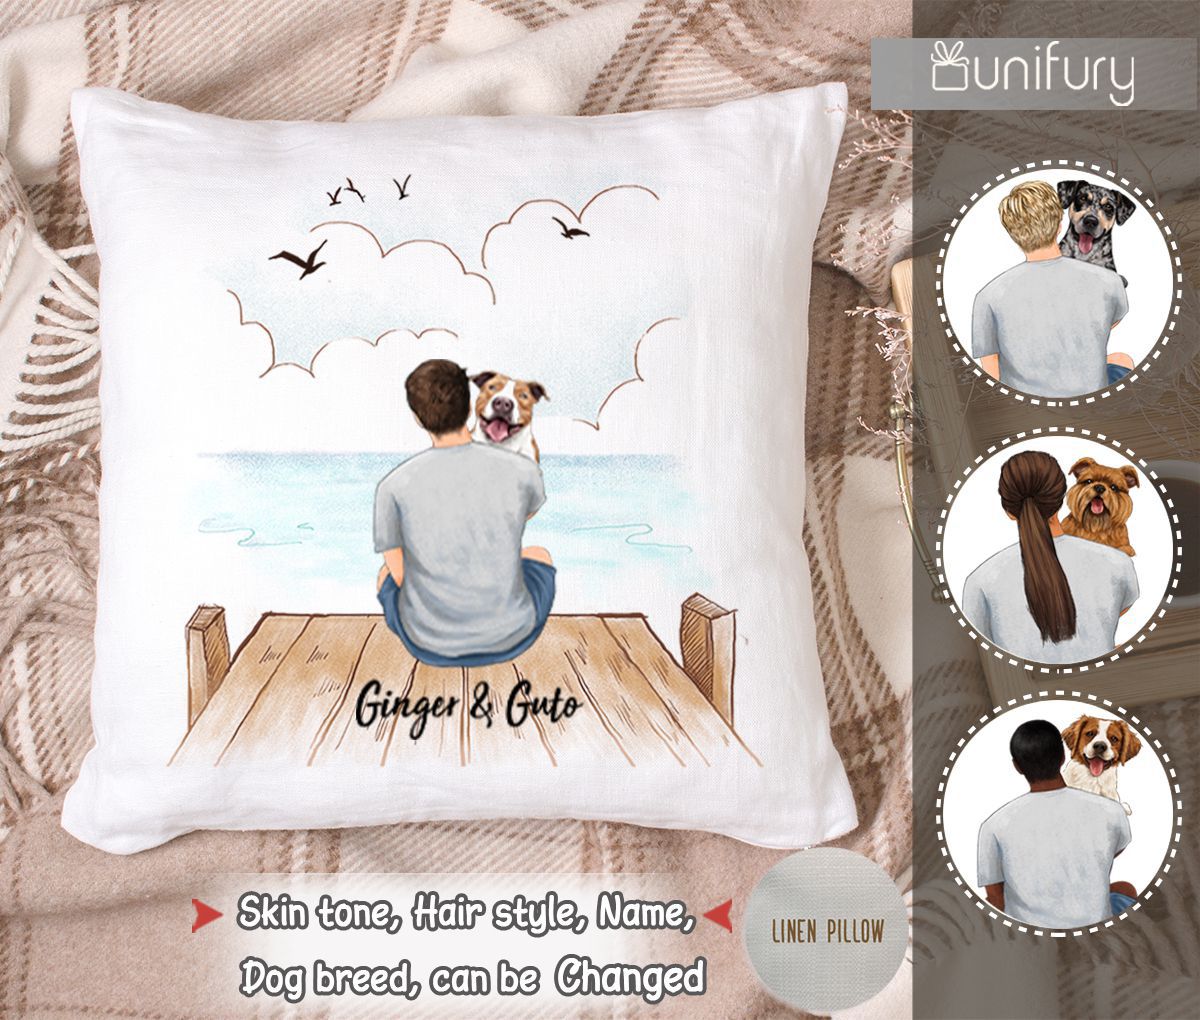 Personalized pillow gifts for dog lovers - Dog Dad - Wooden Dock